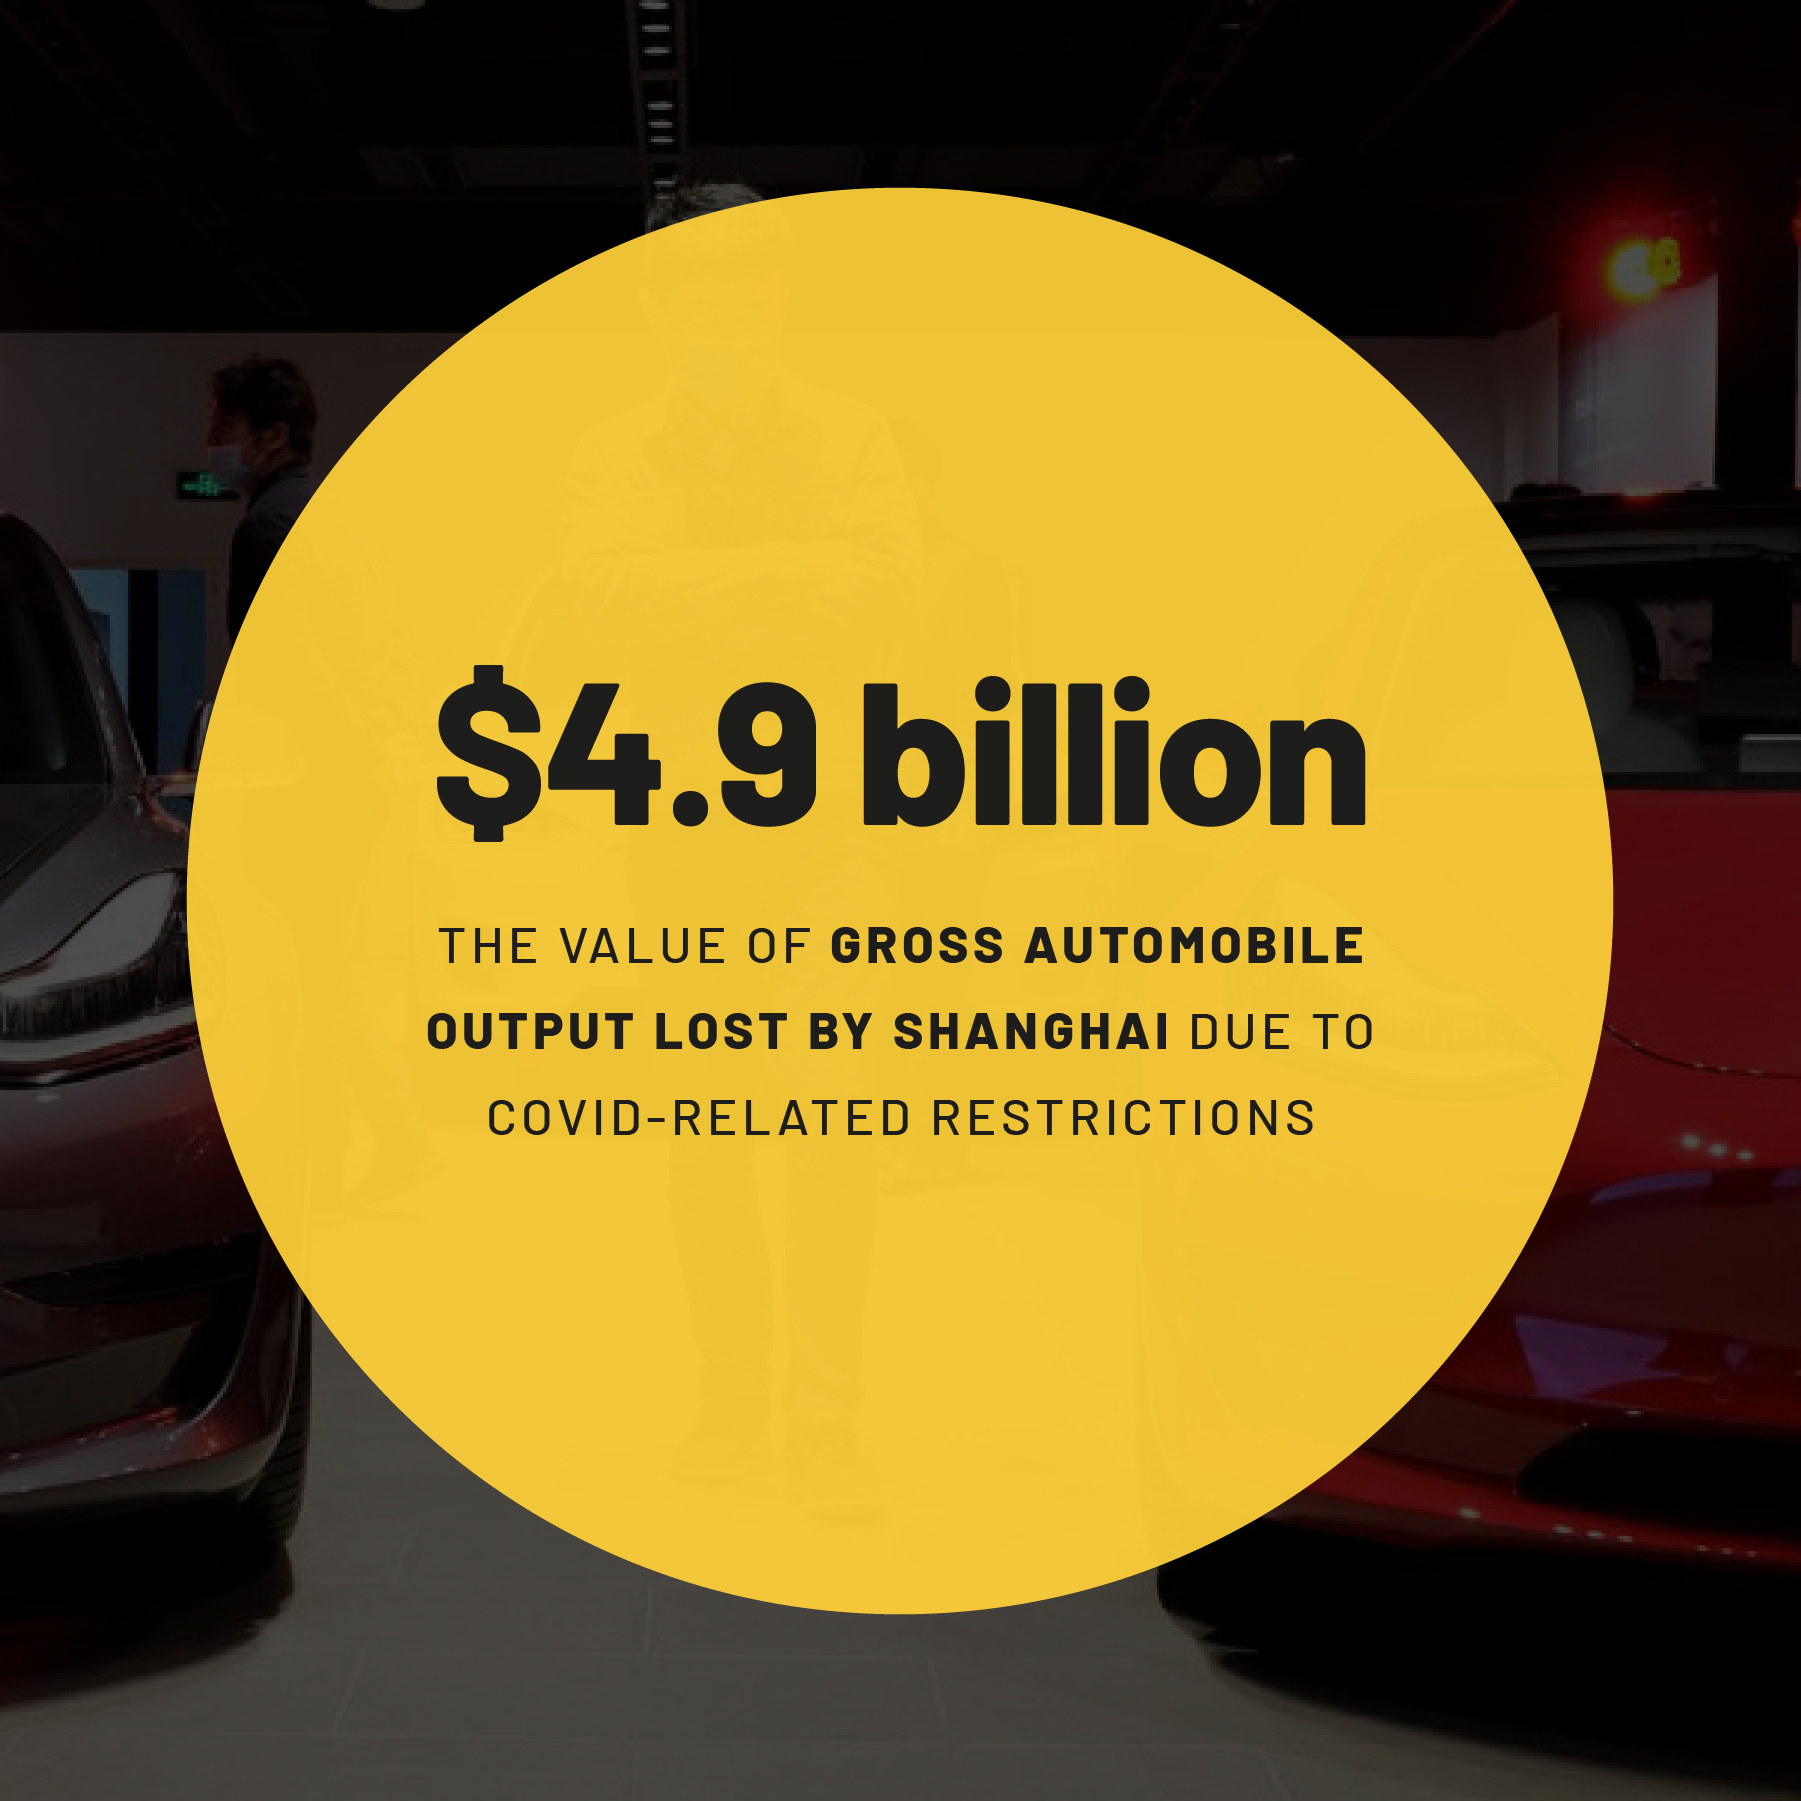 Infographic on the value of gross automobile output lost by Shanghai due to Covid-related restrictions